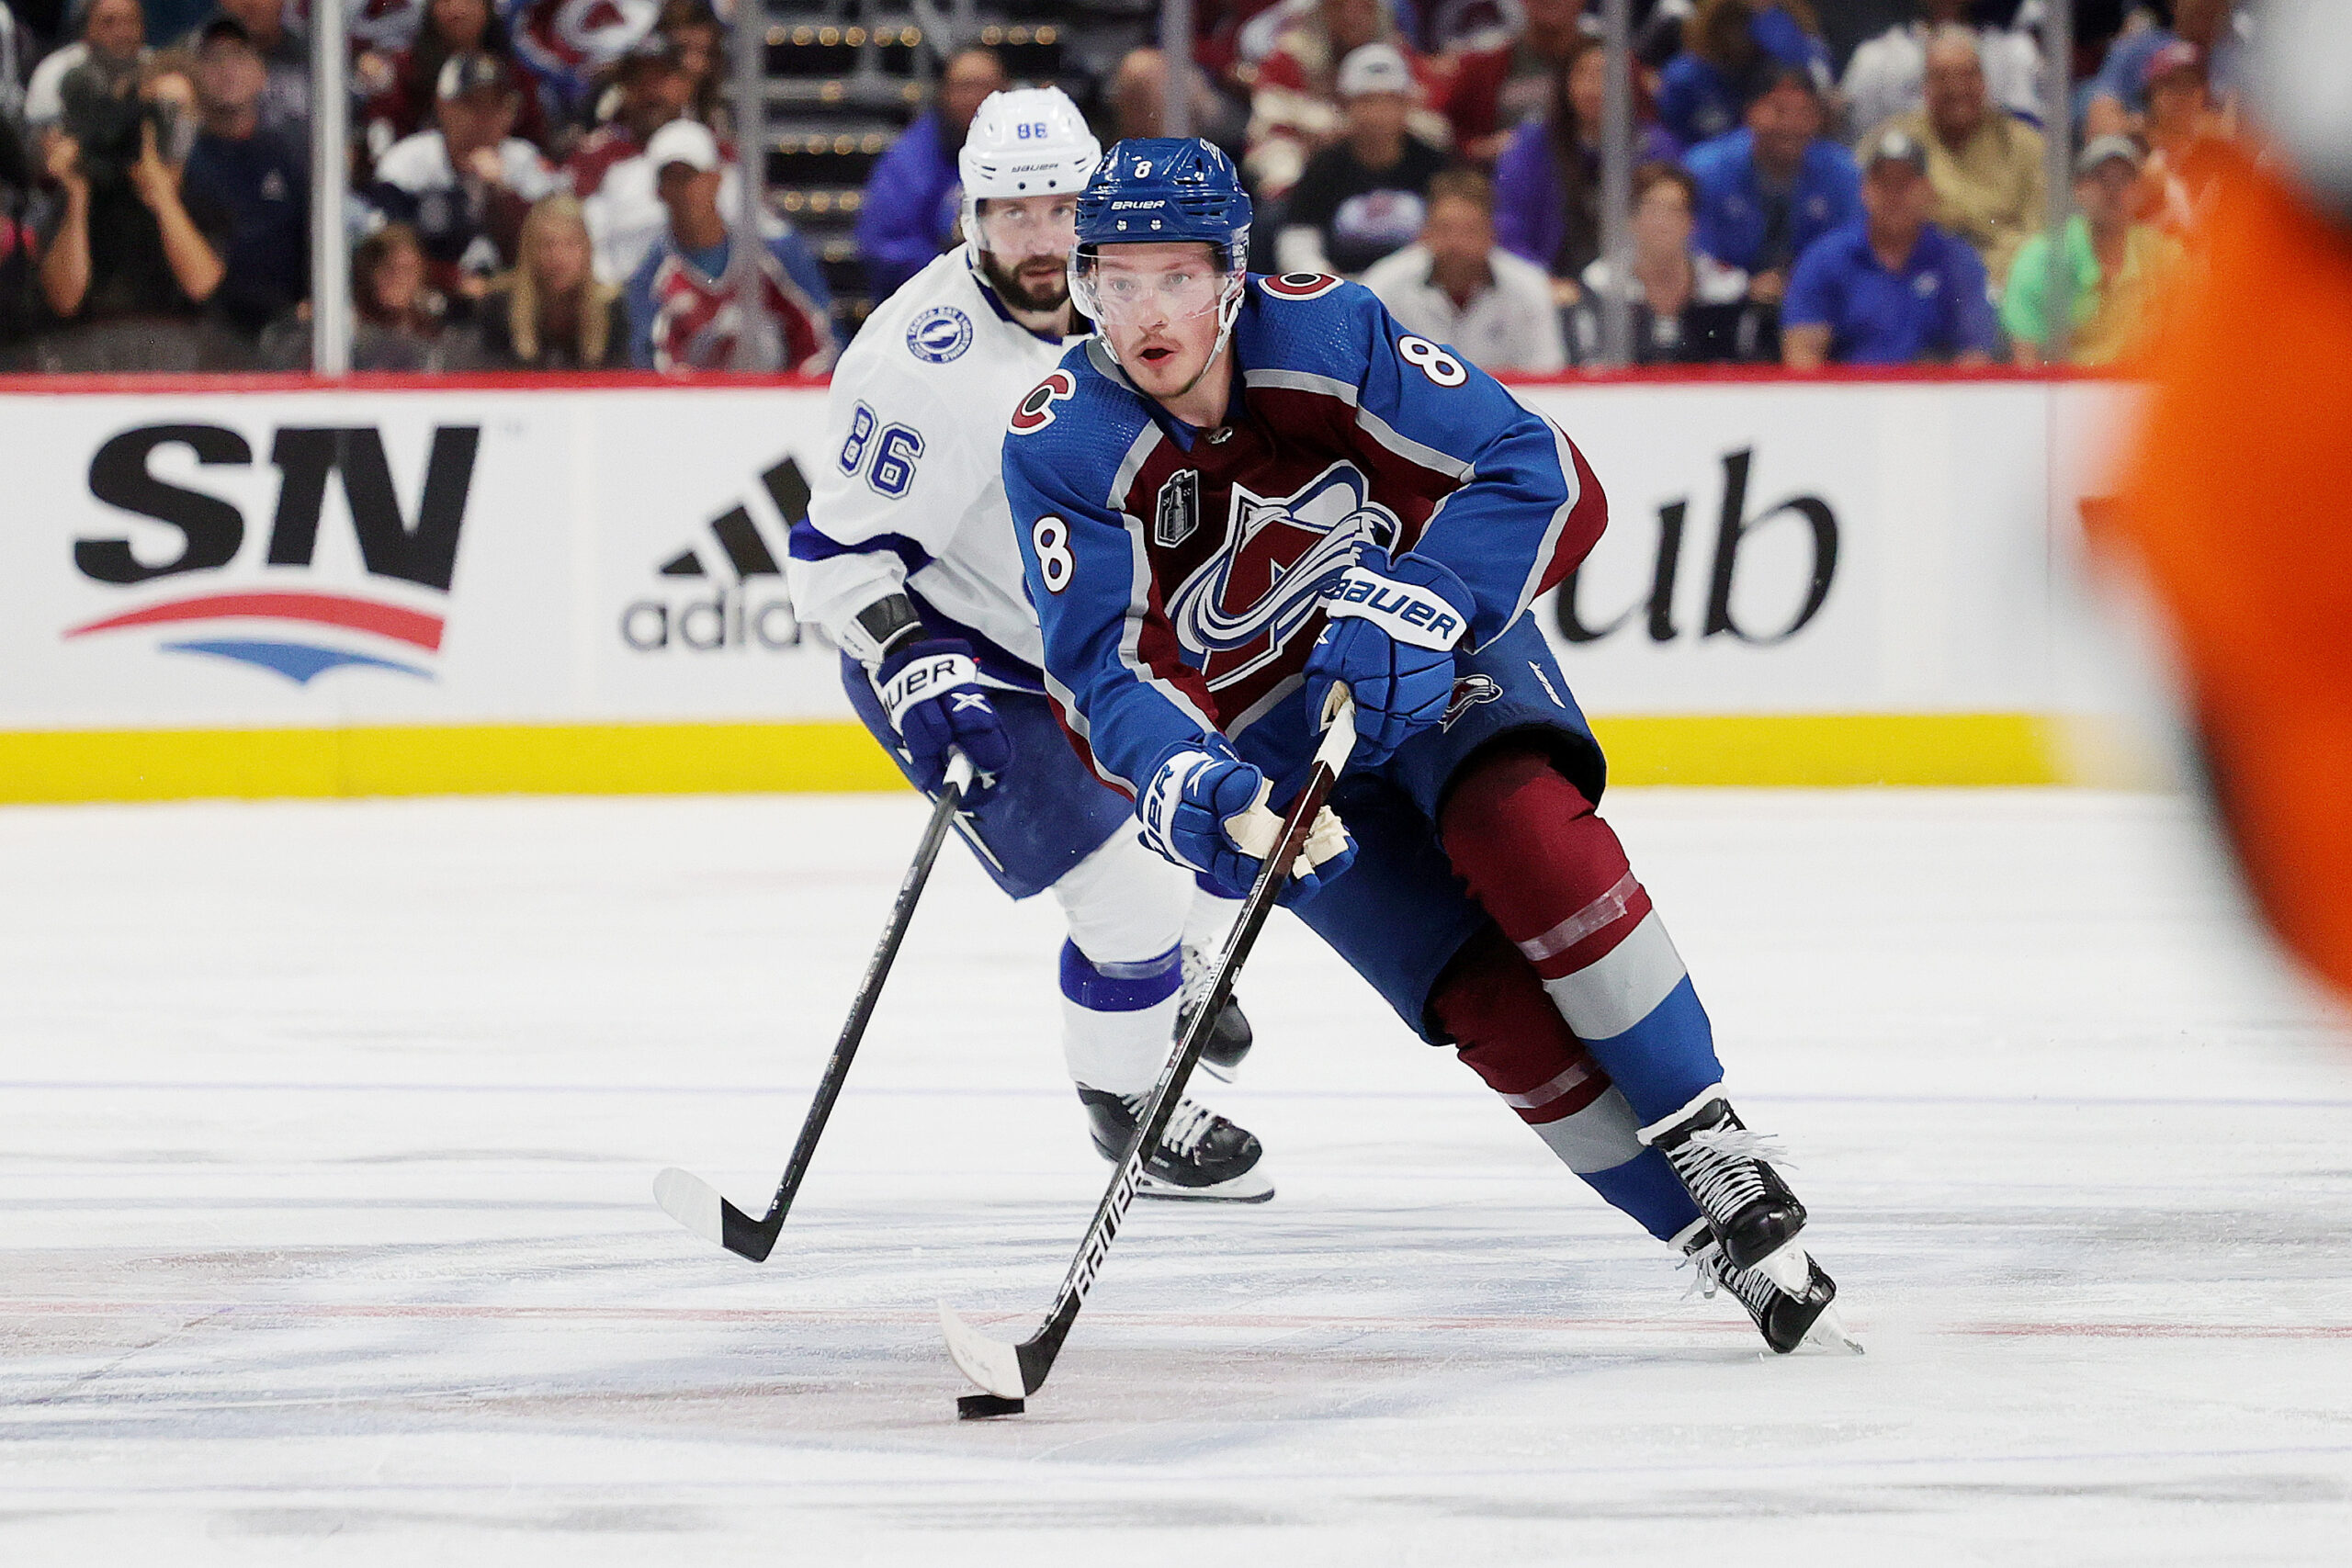 Colorado Avalanche's Cale Makar Making Strong Case for Hall of Fame